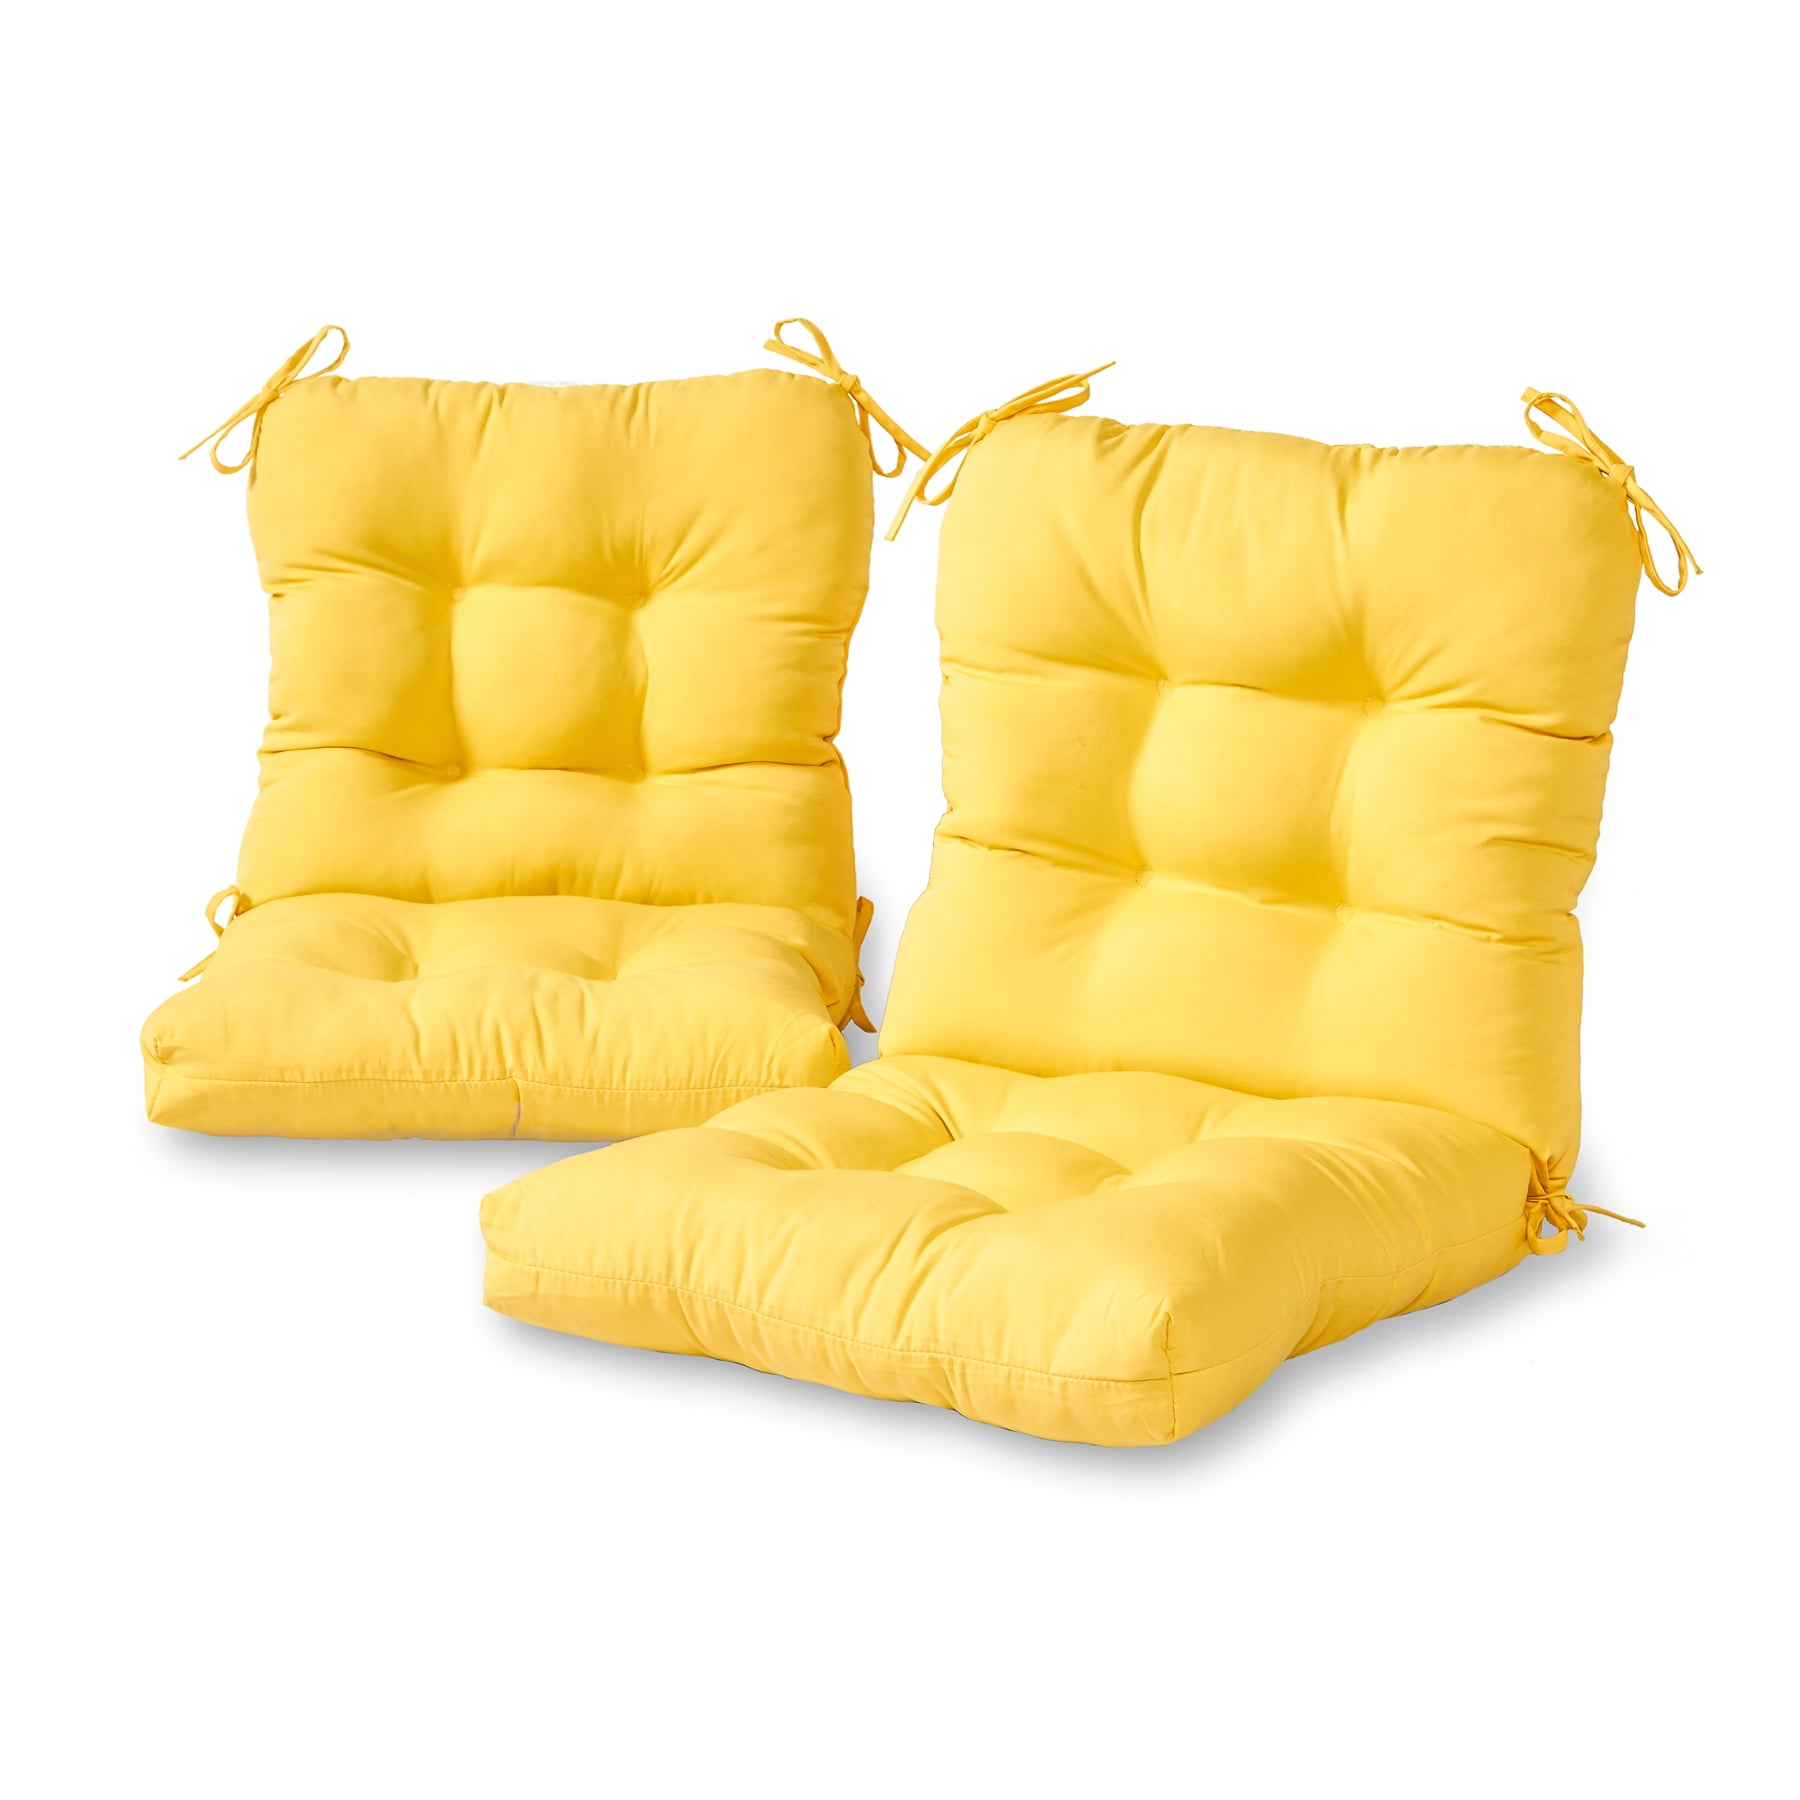 Yellow Cheetah Corded Deep Seating Pillow and Cushion Set, 23 in x 27 in